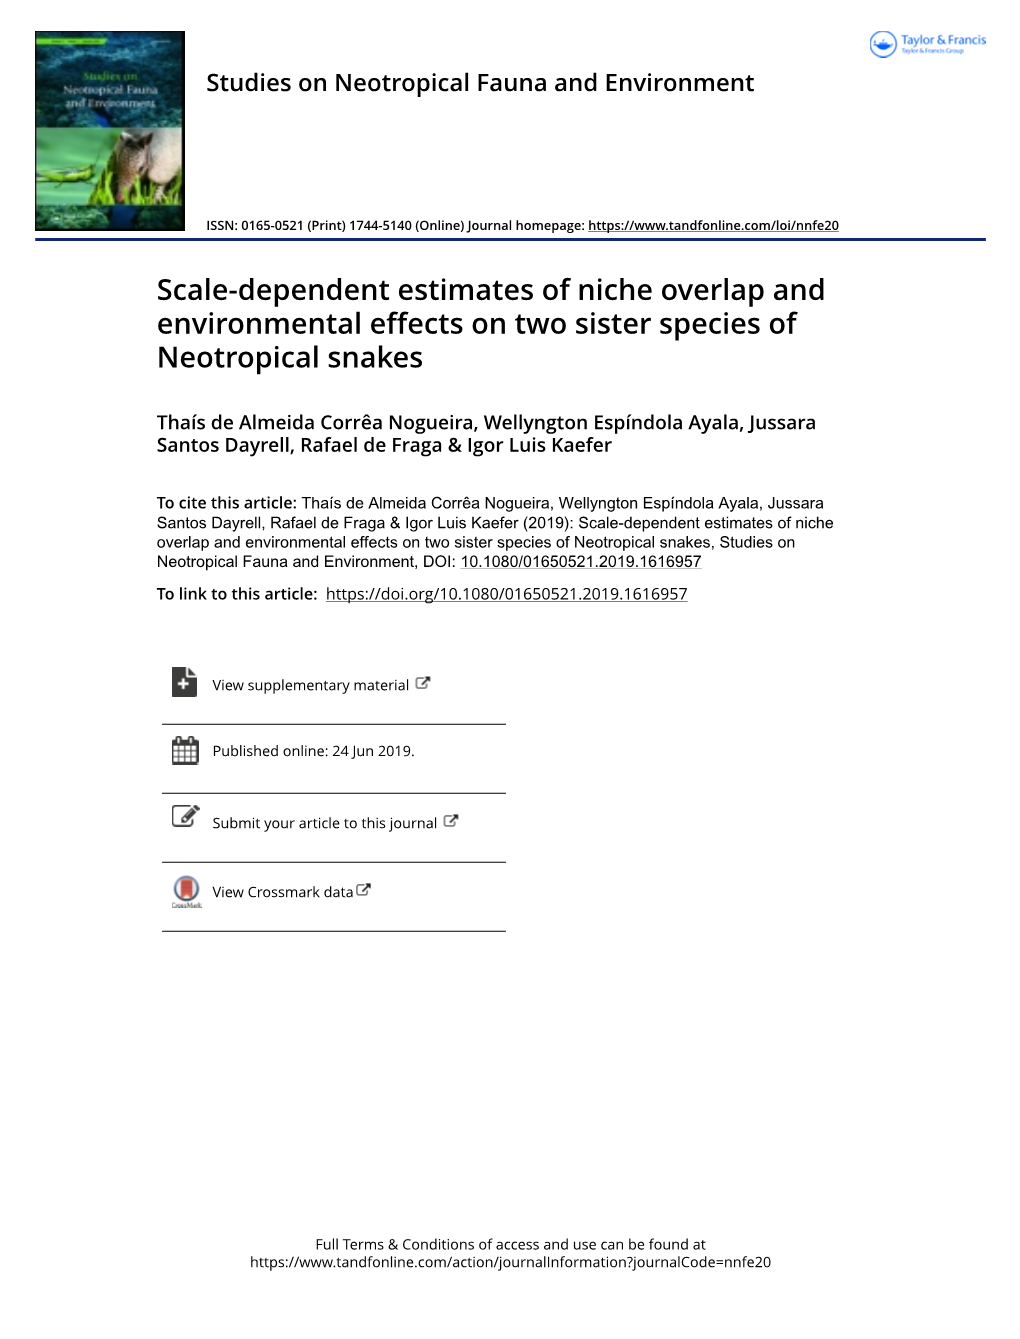 Scale-Dependent Estimates of Niche Overlap and Environmental Effects on Two Sister Species of Neotropical Snakes